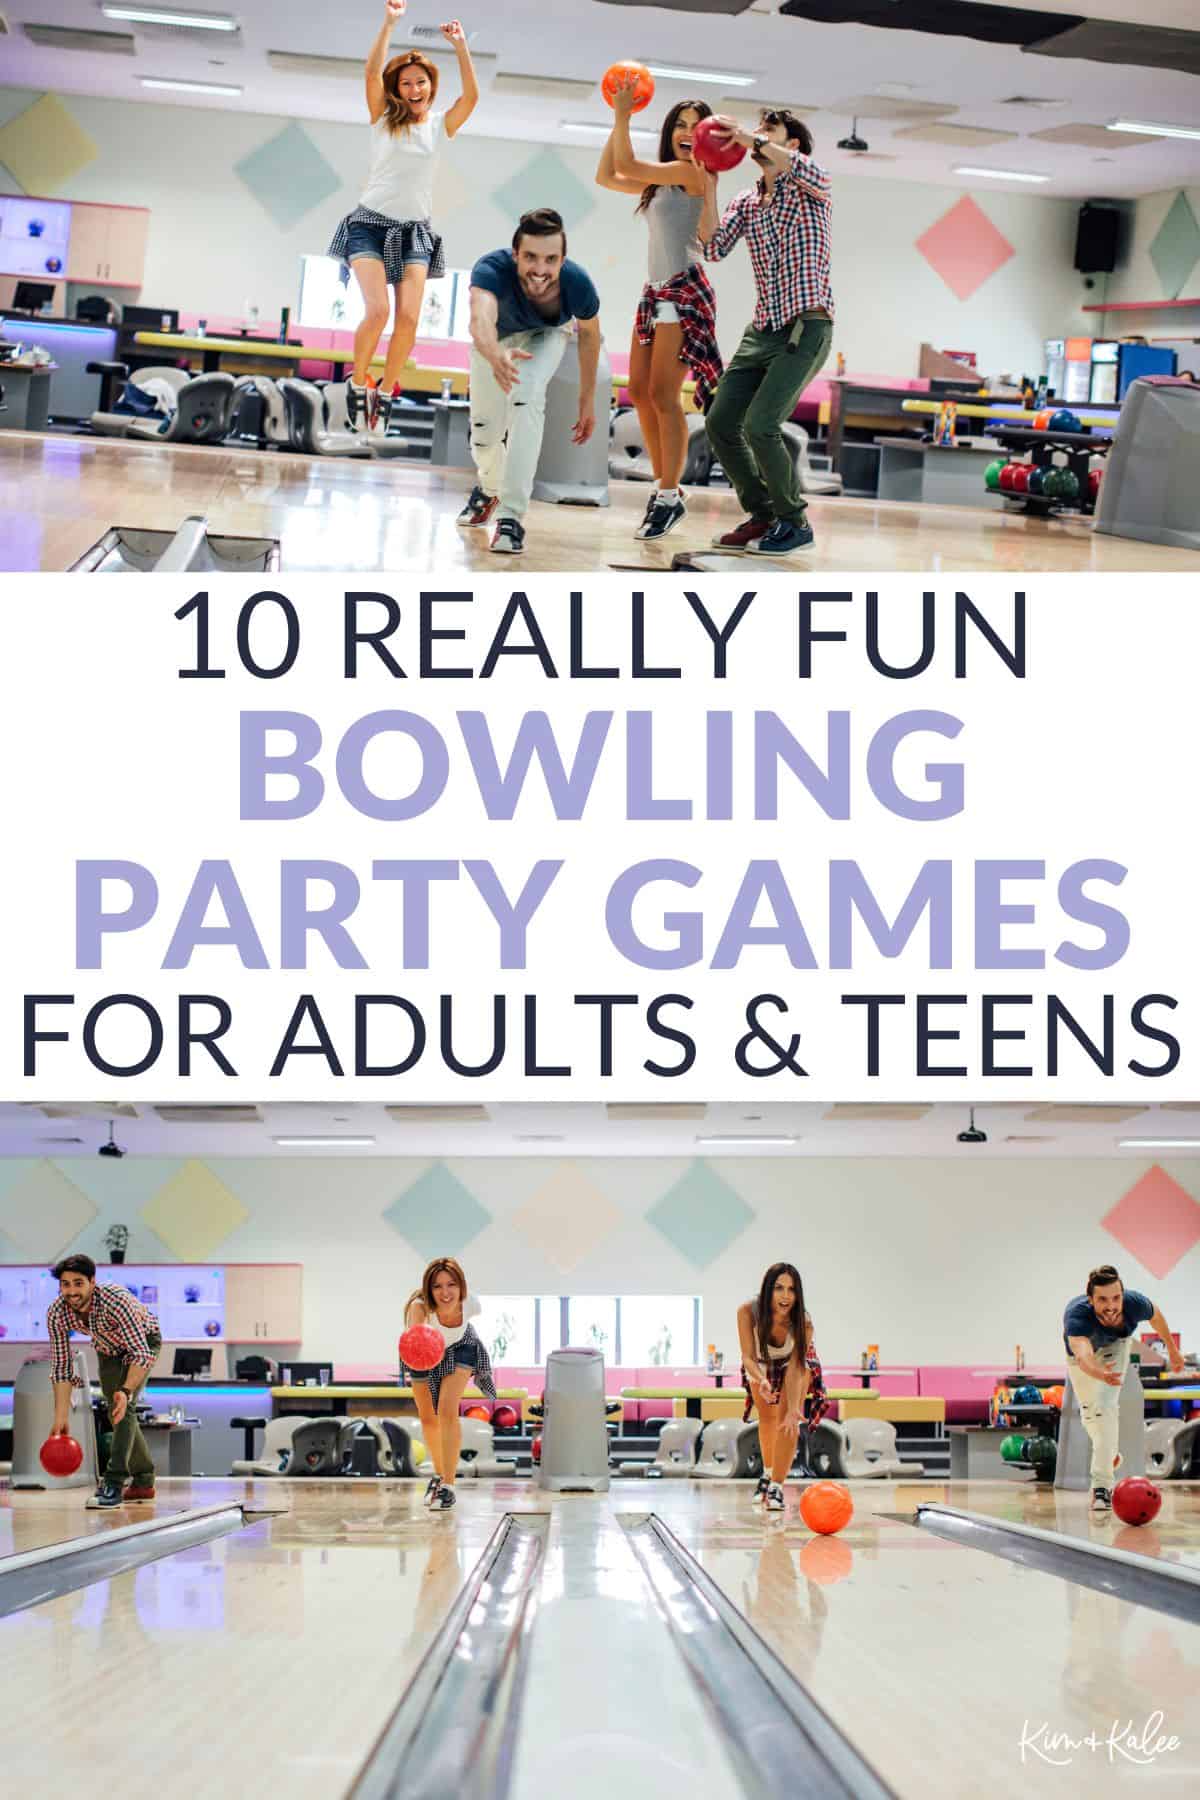 friends at a bowling alley - two photos at different angles - text overlay says 10 really fun bowling party games for adults and teens